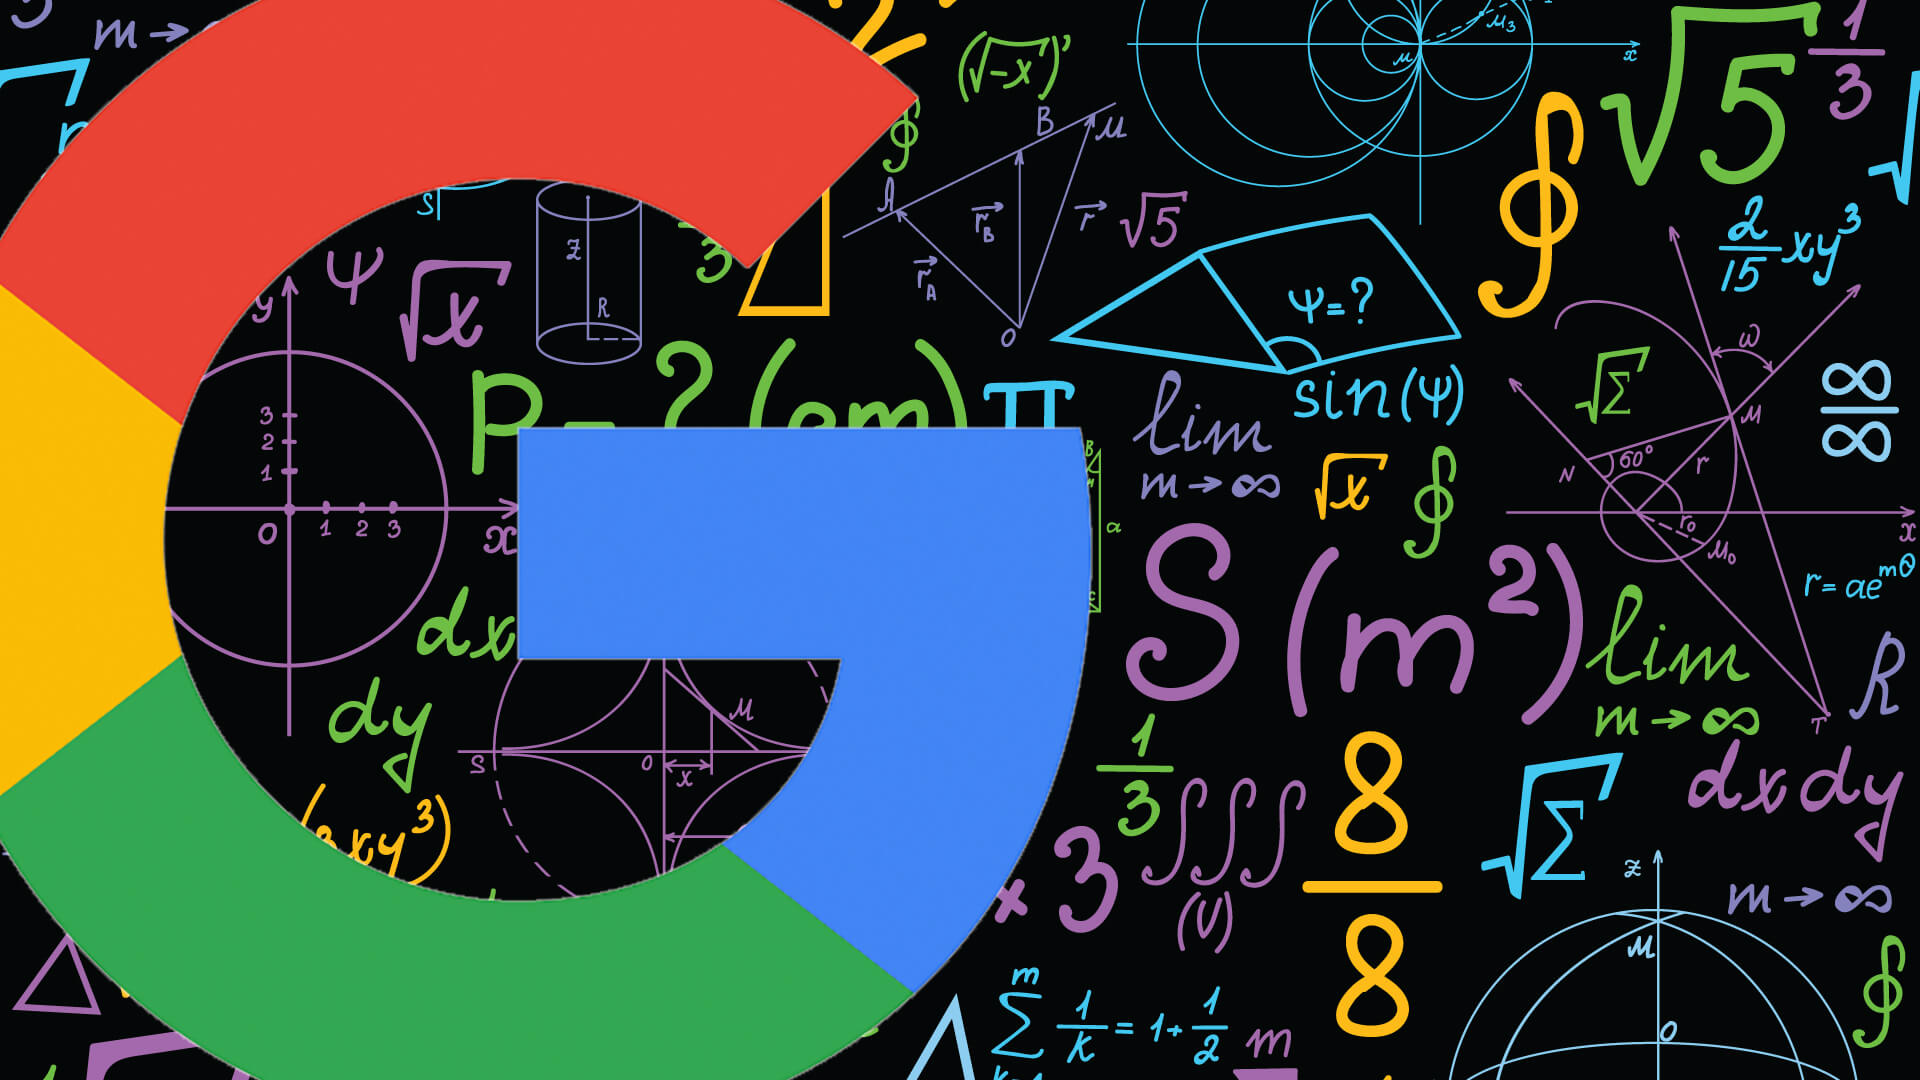 What is Google Algorithm? How does it work?